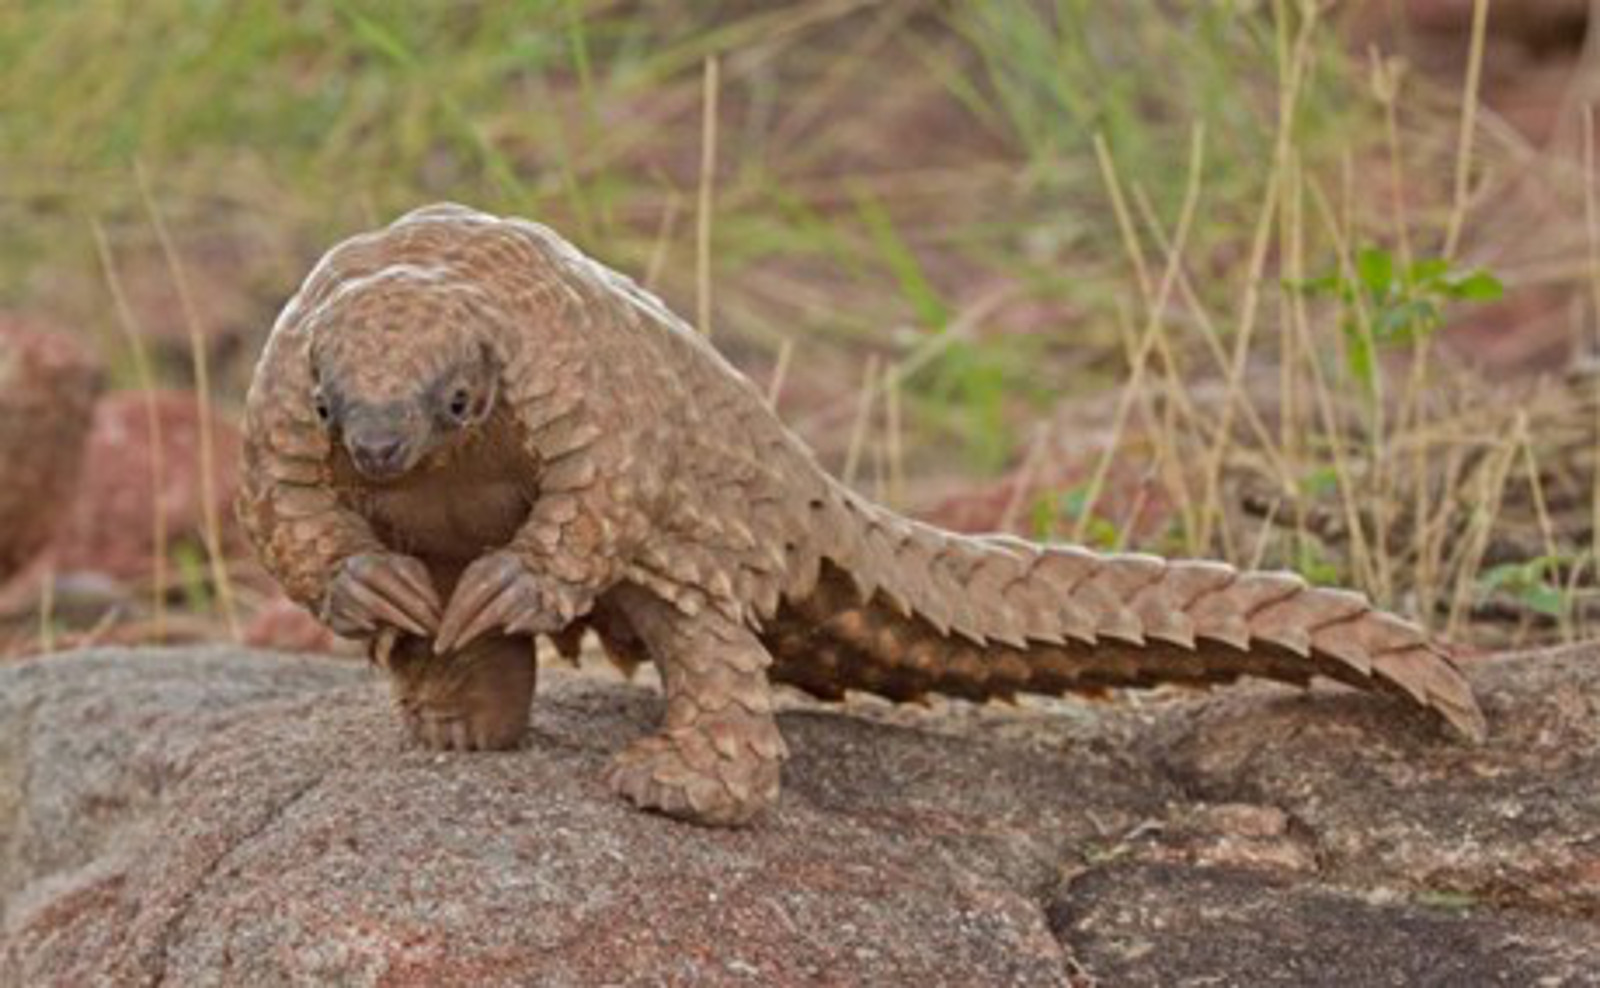 Where Have All the Pangolins Gone?